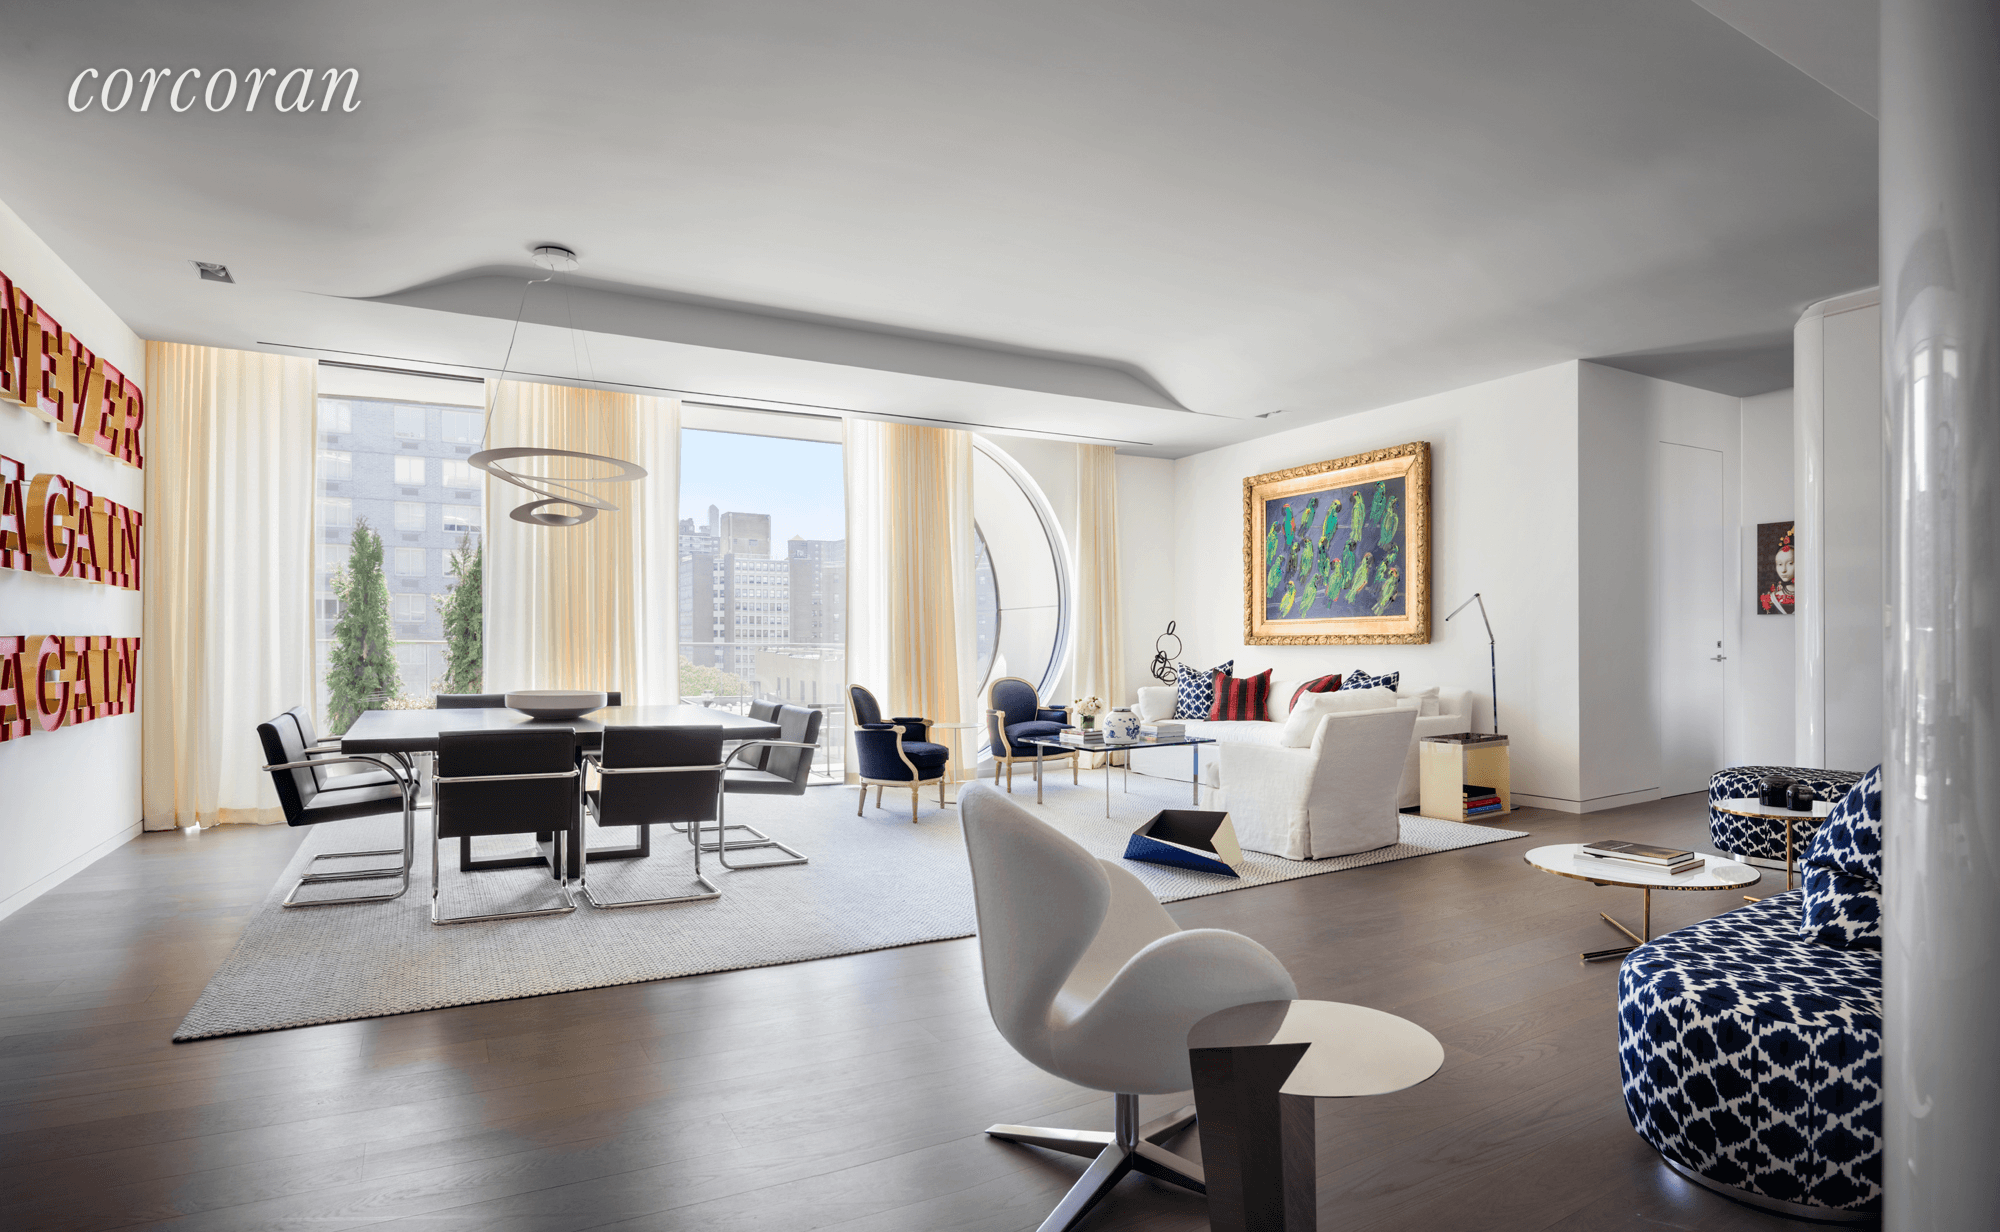 Overlooking the West Chelsea skyline, The High Line, and a verdant new sculpture garden, this high floor residence is truly a work of art designed inside and out by Dame ...